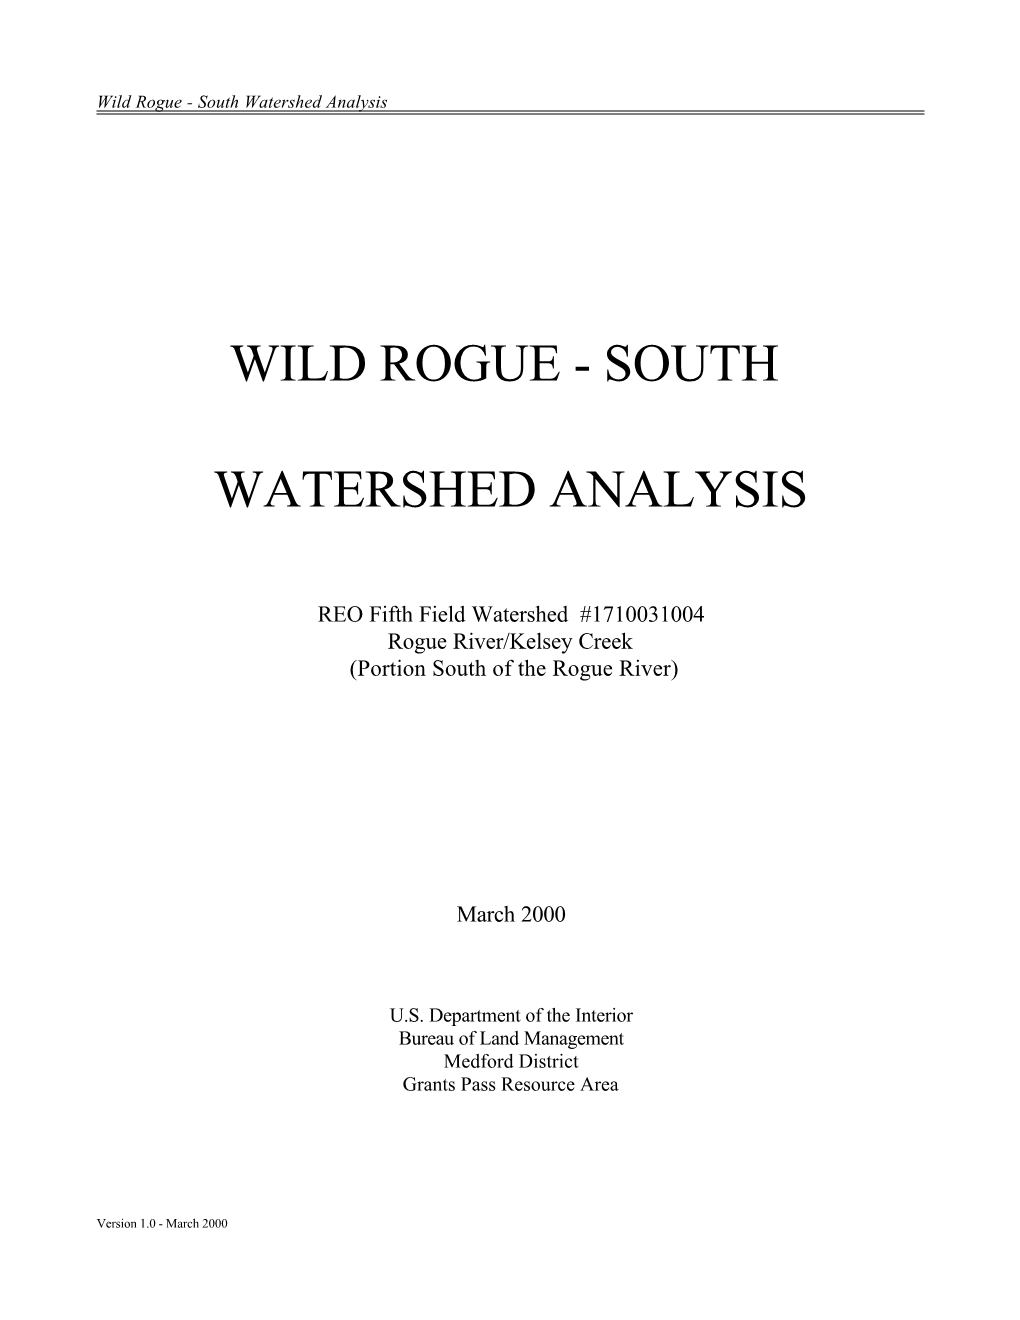 Wild Rogue South Watershed Analysis